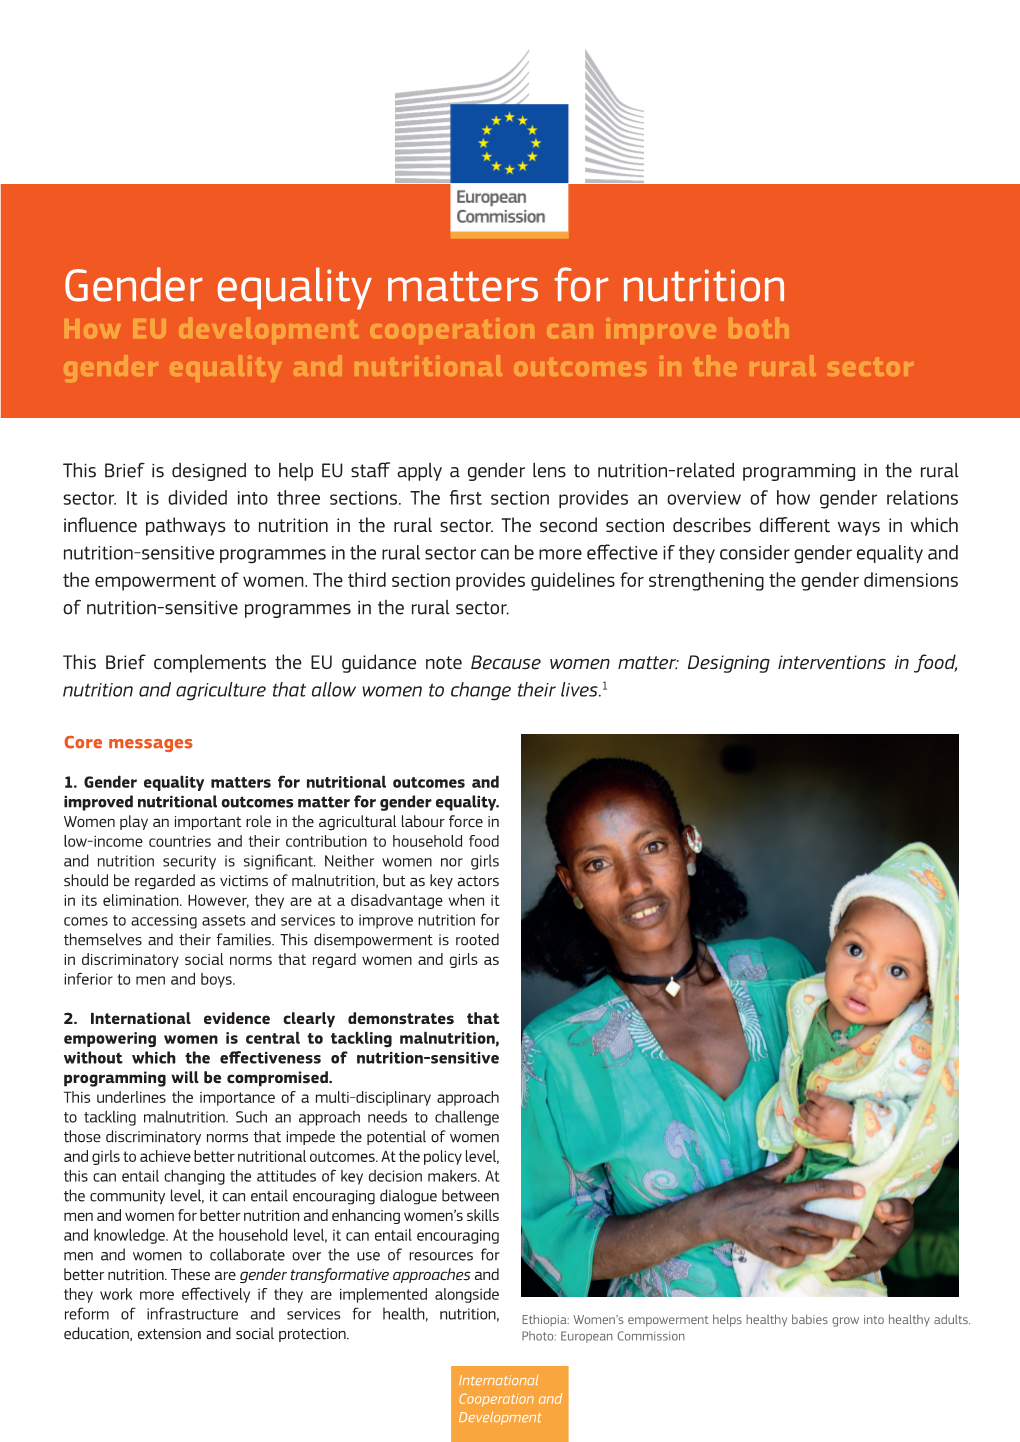 Gender Equality Matters for Nutrition How EU Development Cooperation Can Improve Both Gender Equality and Nutritional Outcomes in the Rural Sector